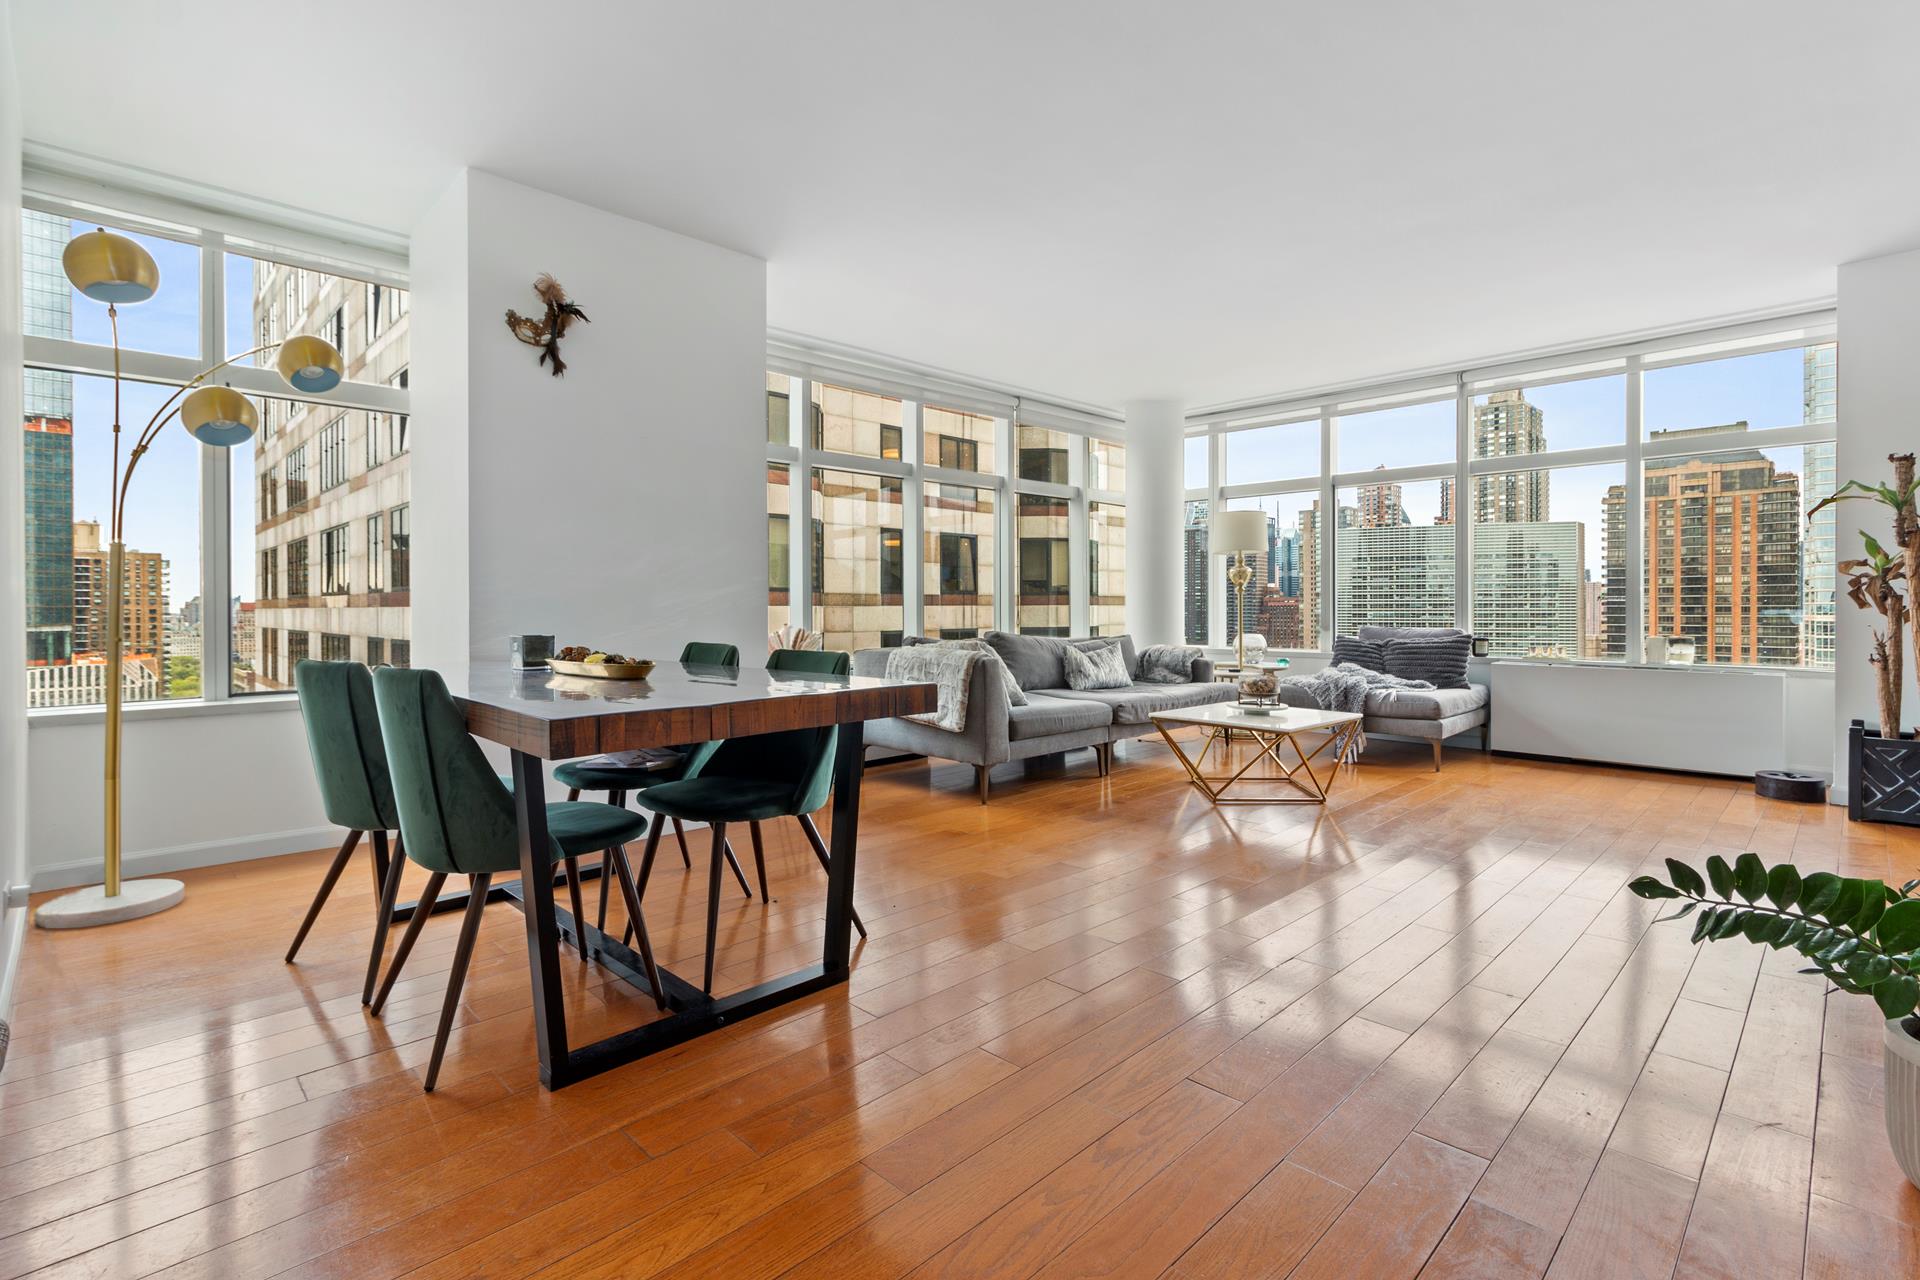 160 West 66th Street 27G, Lincoln Sq, Upper West Side, NYC - 2 Bedrooms  
2.5 Bathrooms  
5 Rooms - 